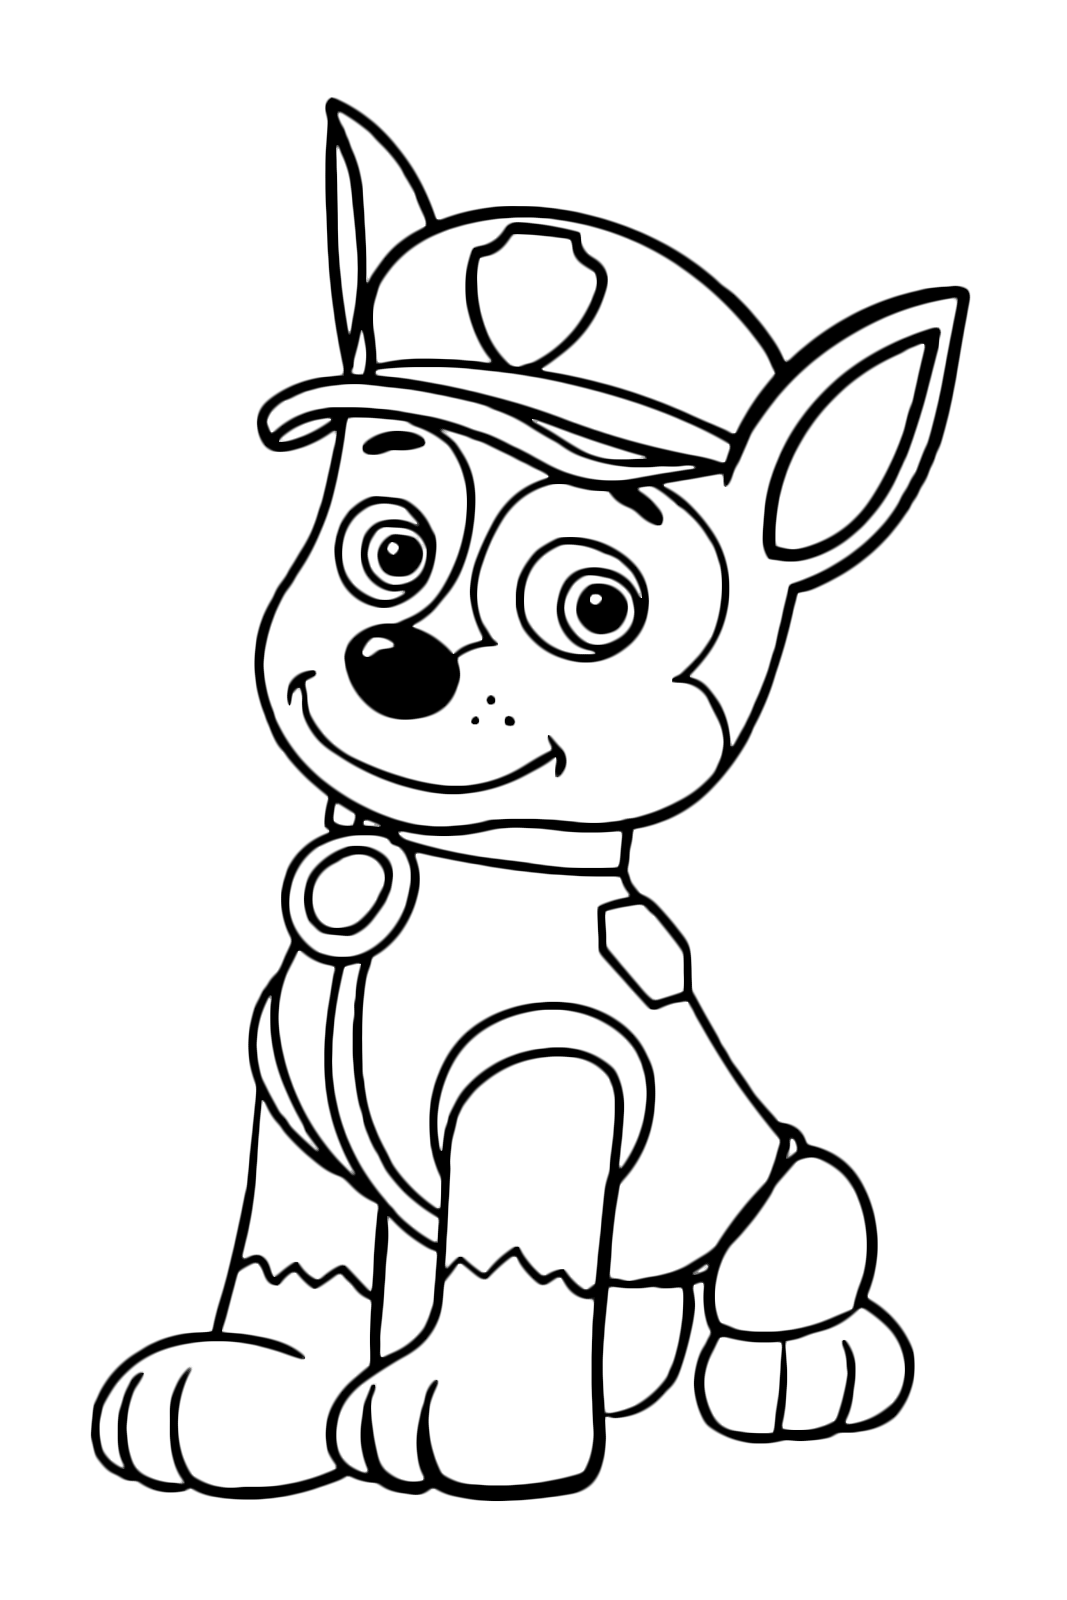 PAW Patrol - Chase the police dog is resting sitting